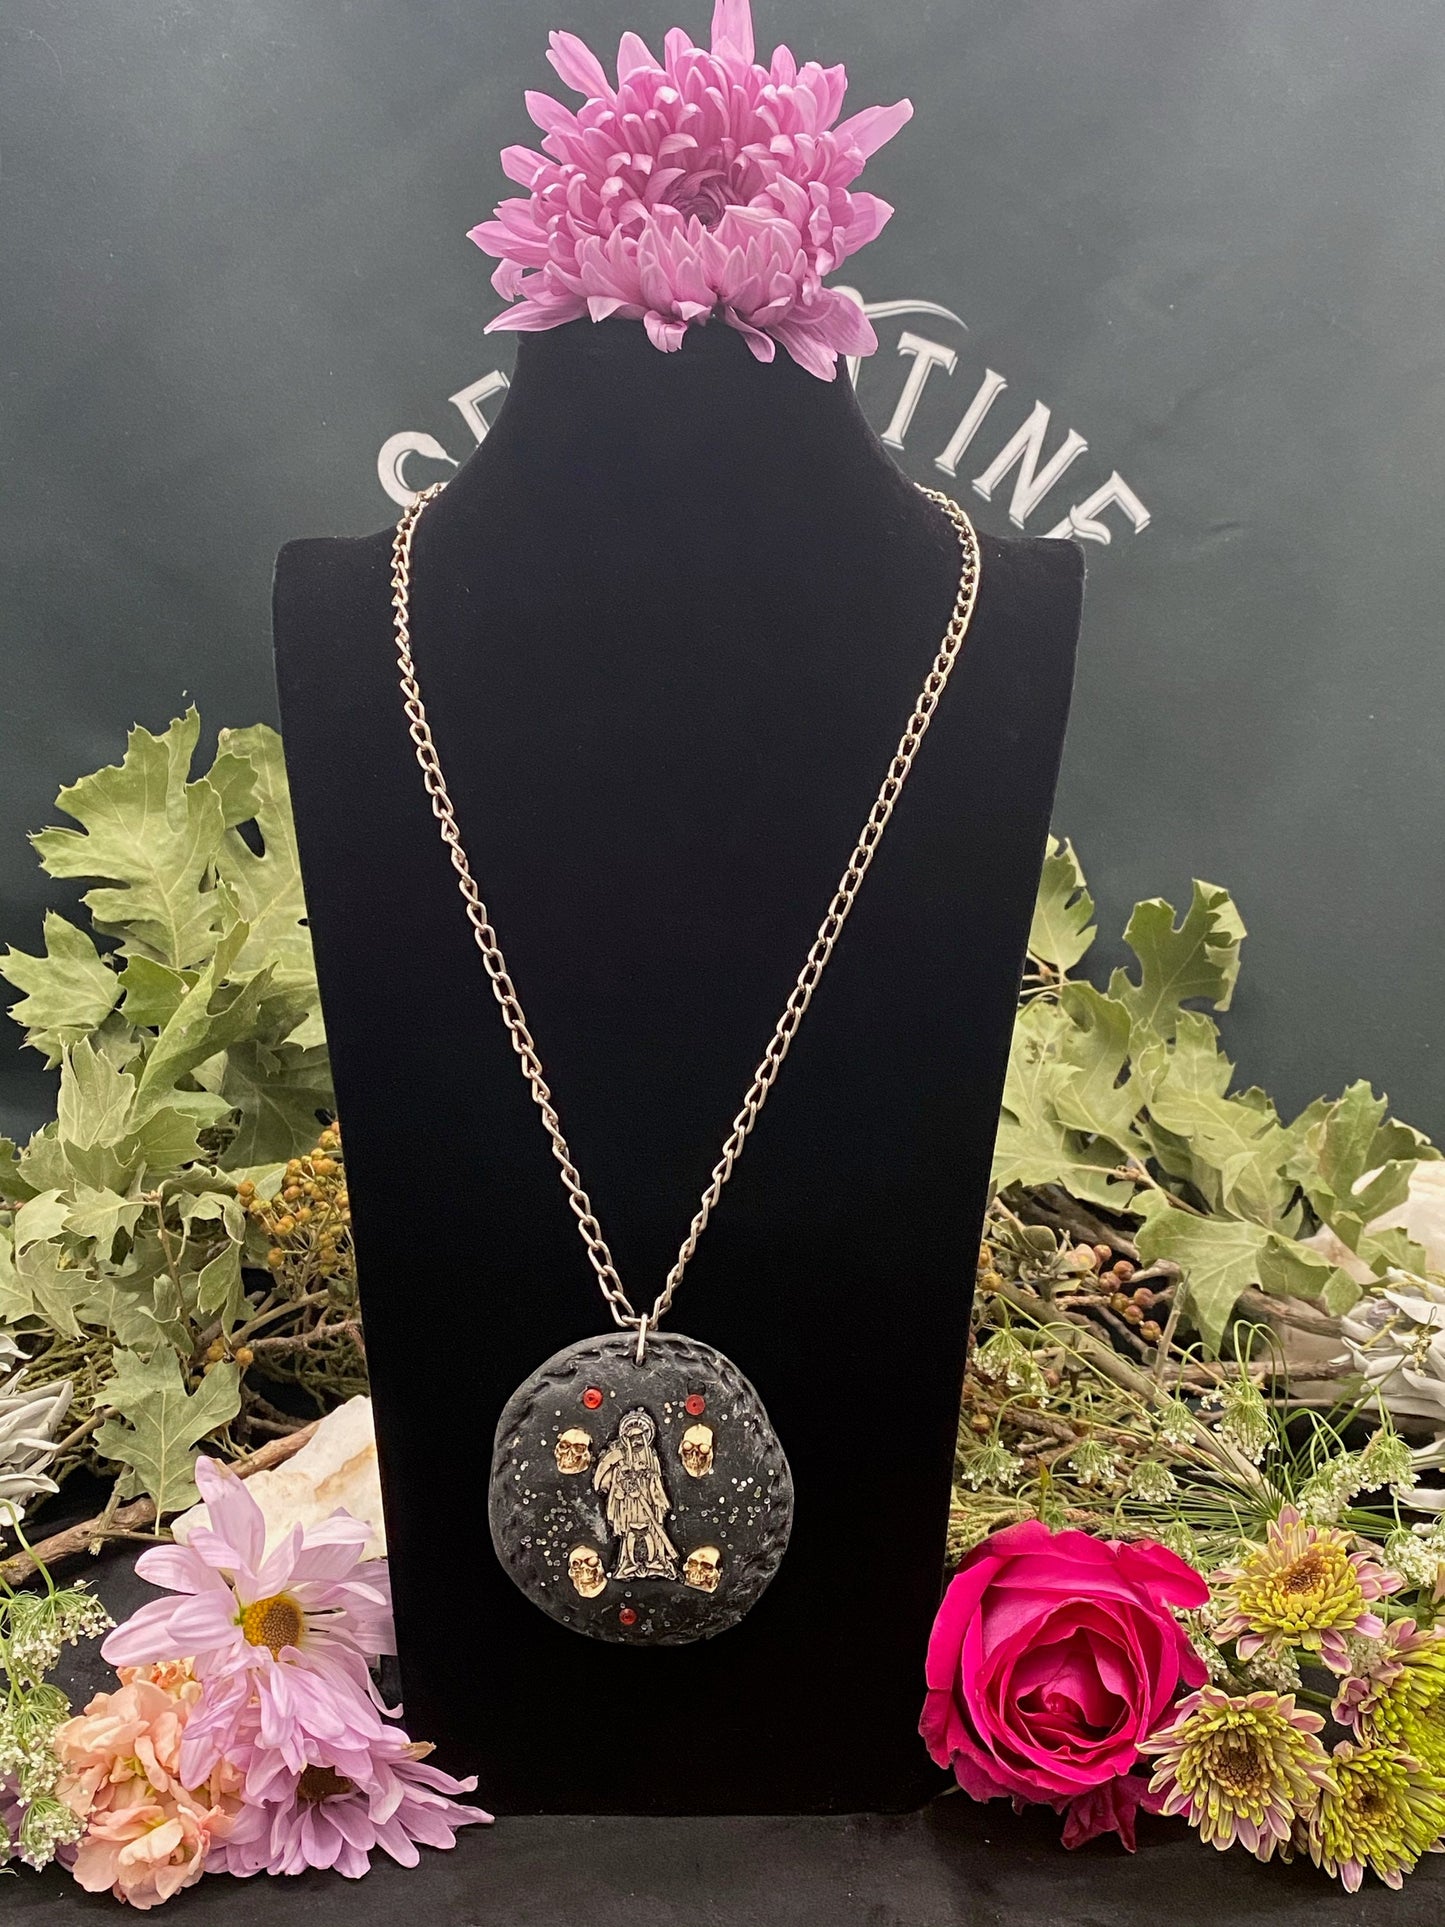 Round Santa Muerte Necklace + Silver Glitter + Protection + Made in Mexico